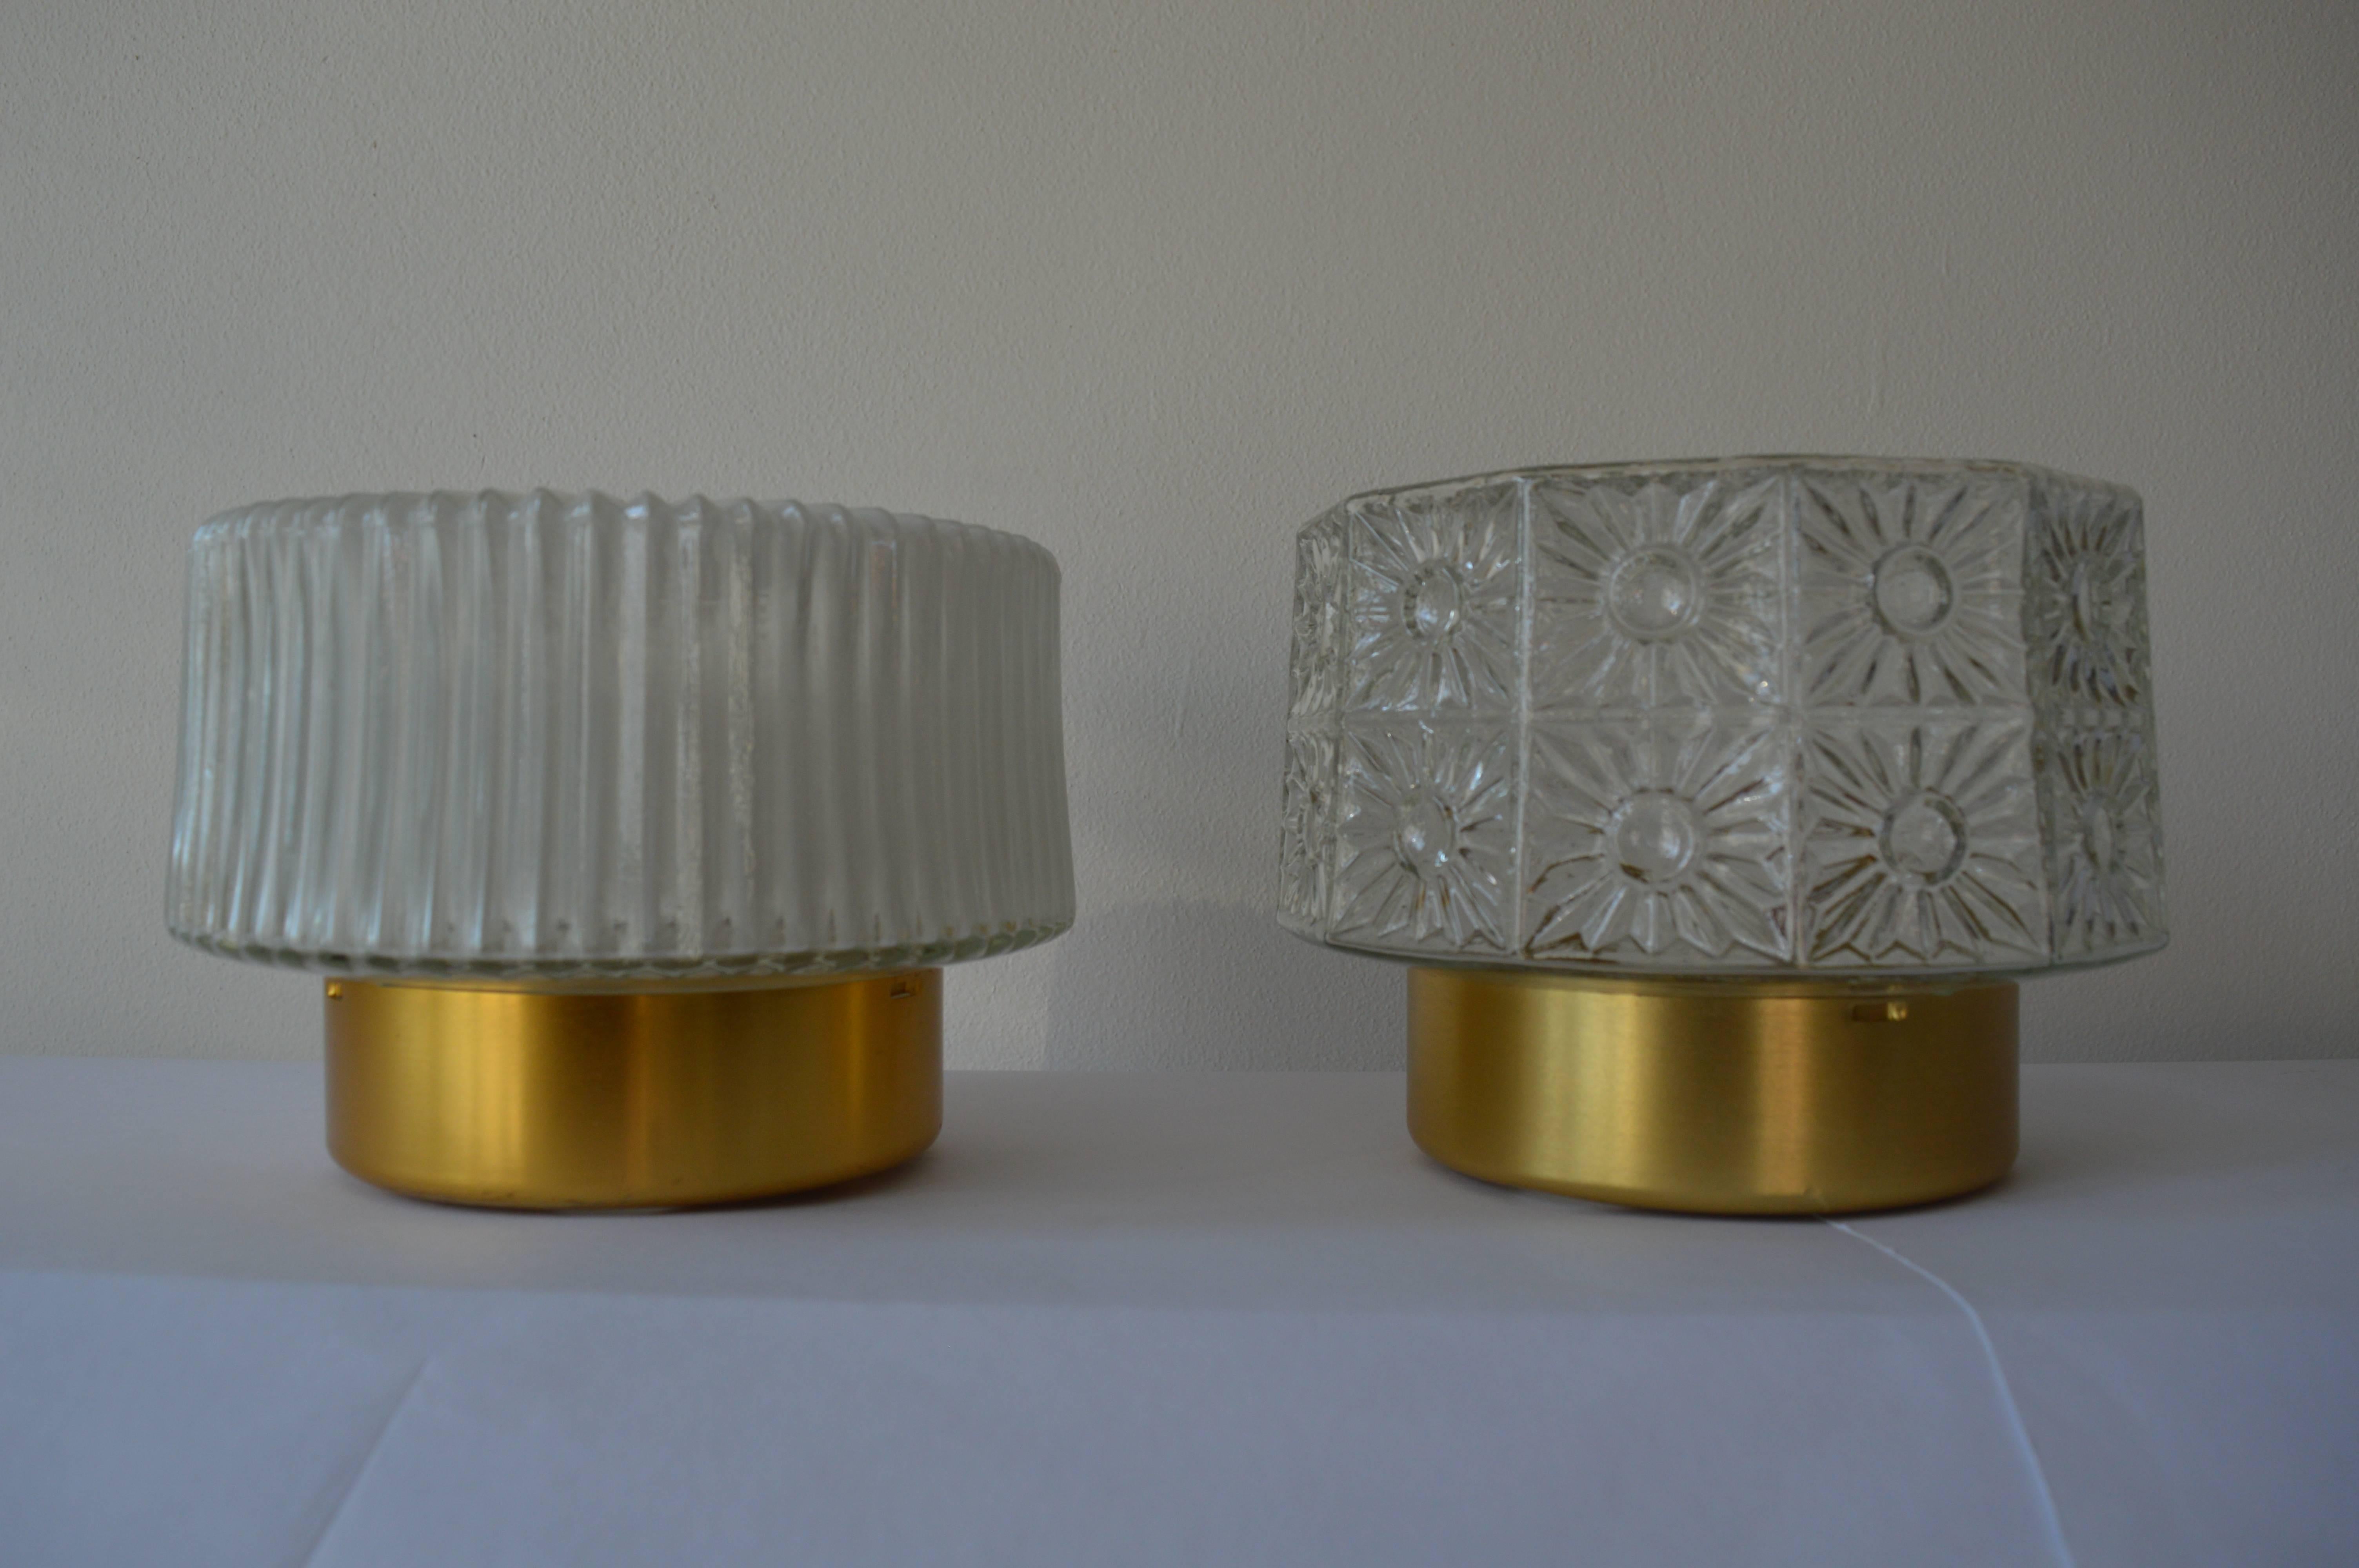 Two design wall lamp from Germany.